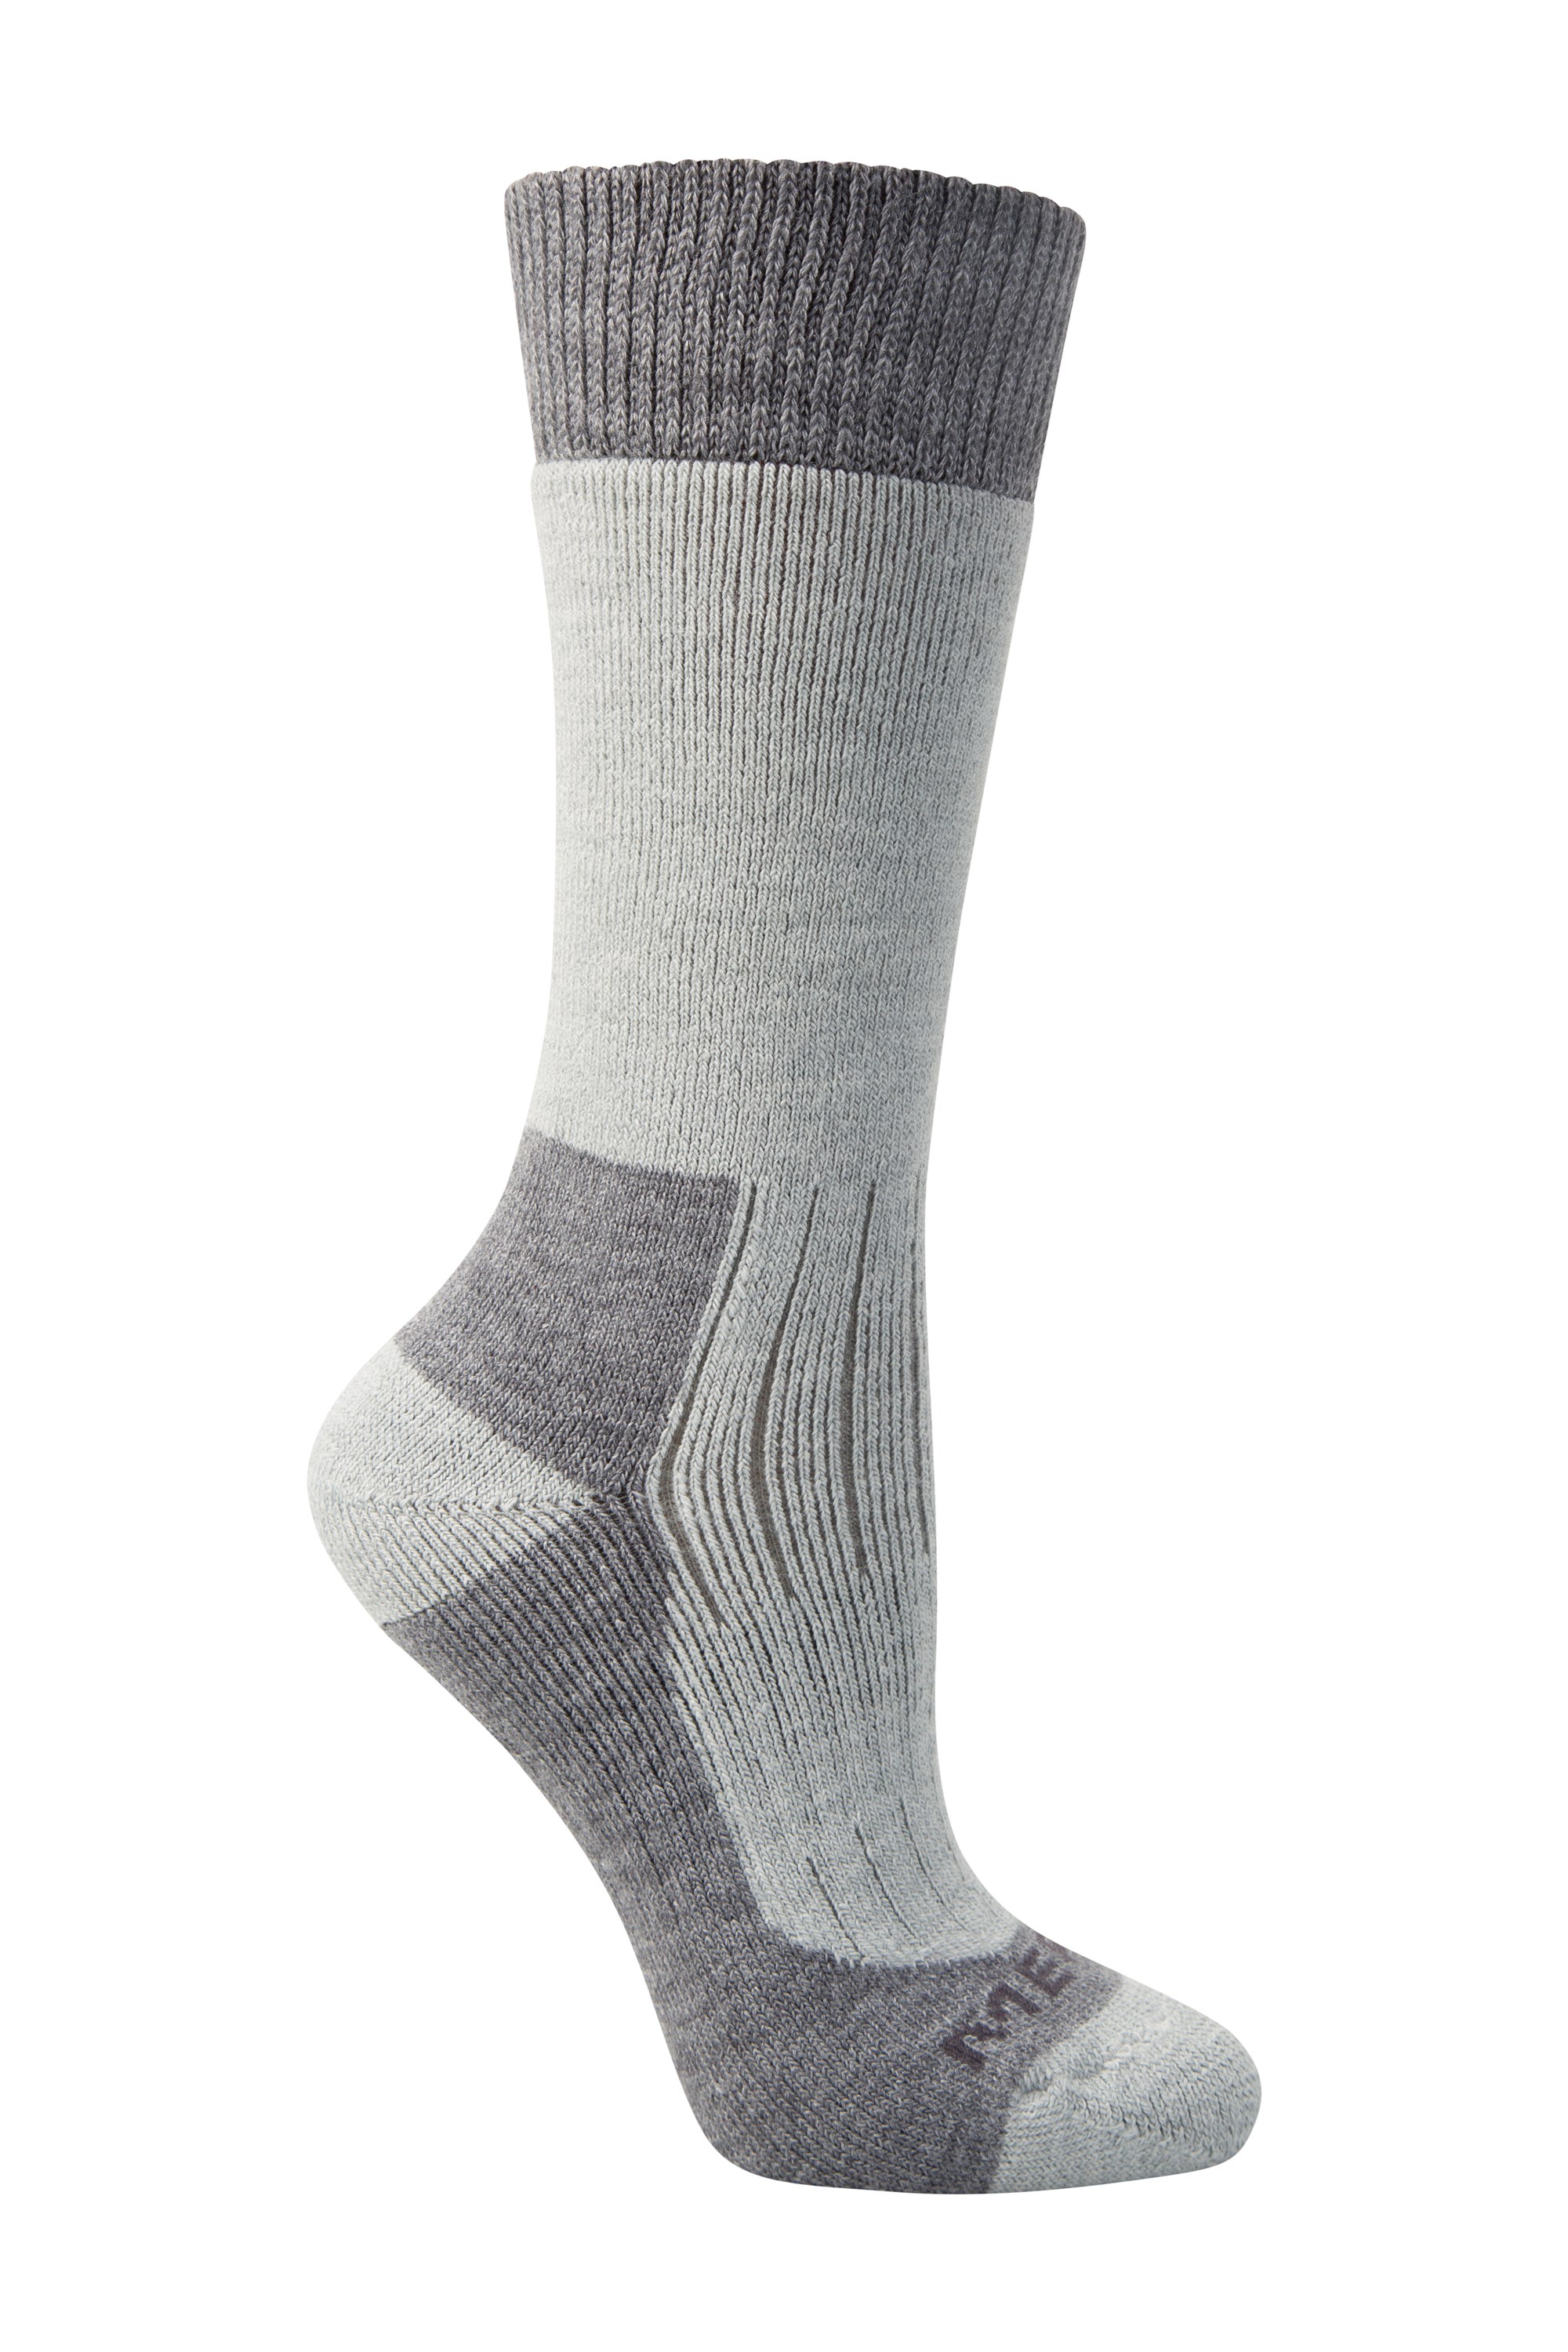 Mountain Warehouse Wms  IsoCool Womens Performance Sock 3-Pack In Light Grey 